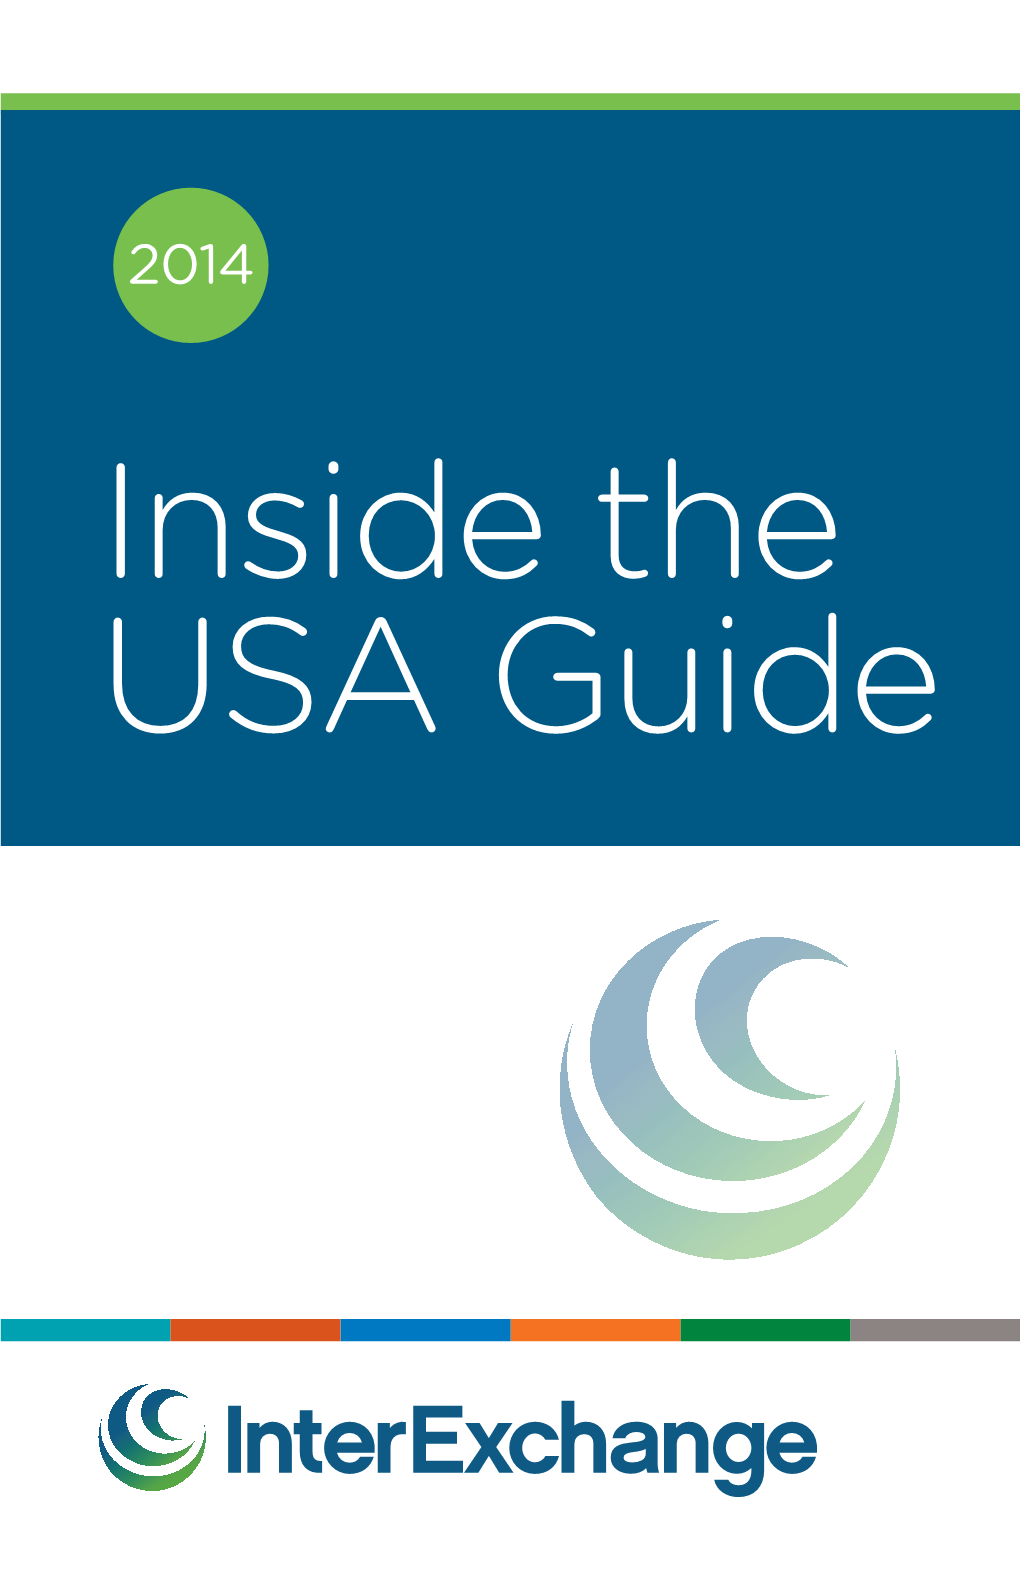 Interexchange | Inside the USA Guide